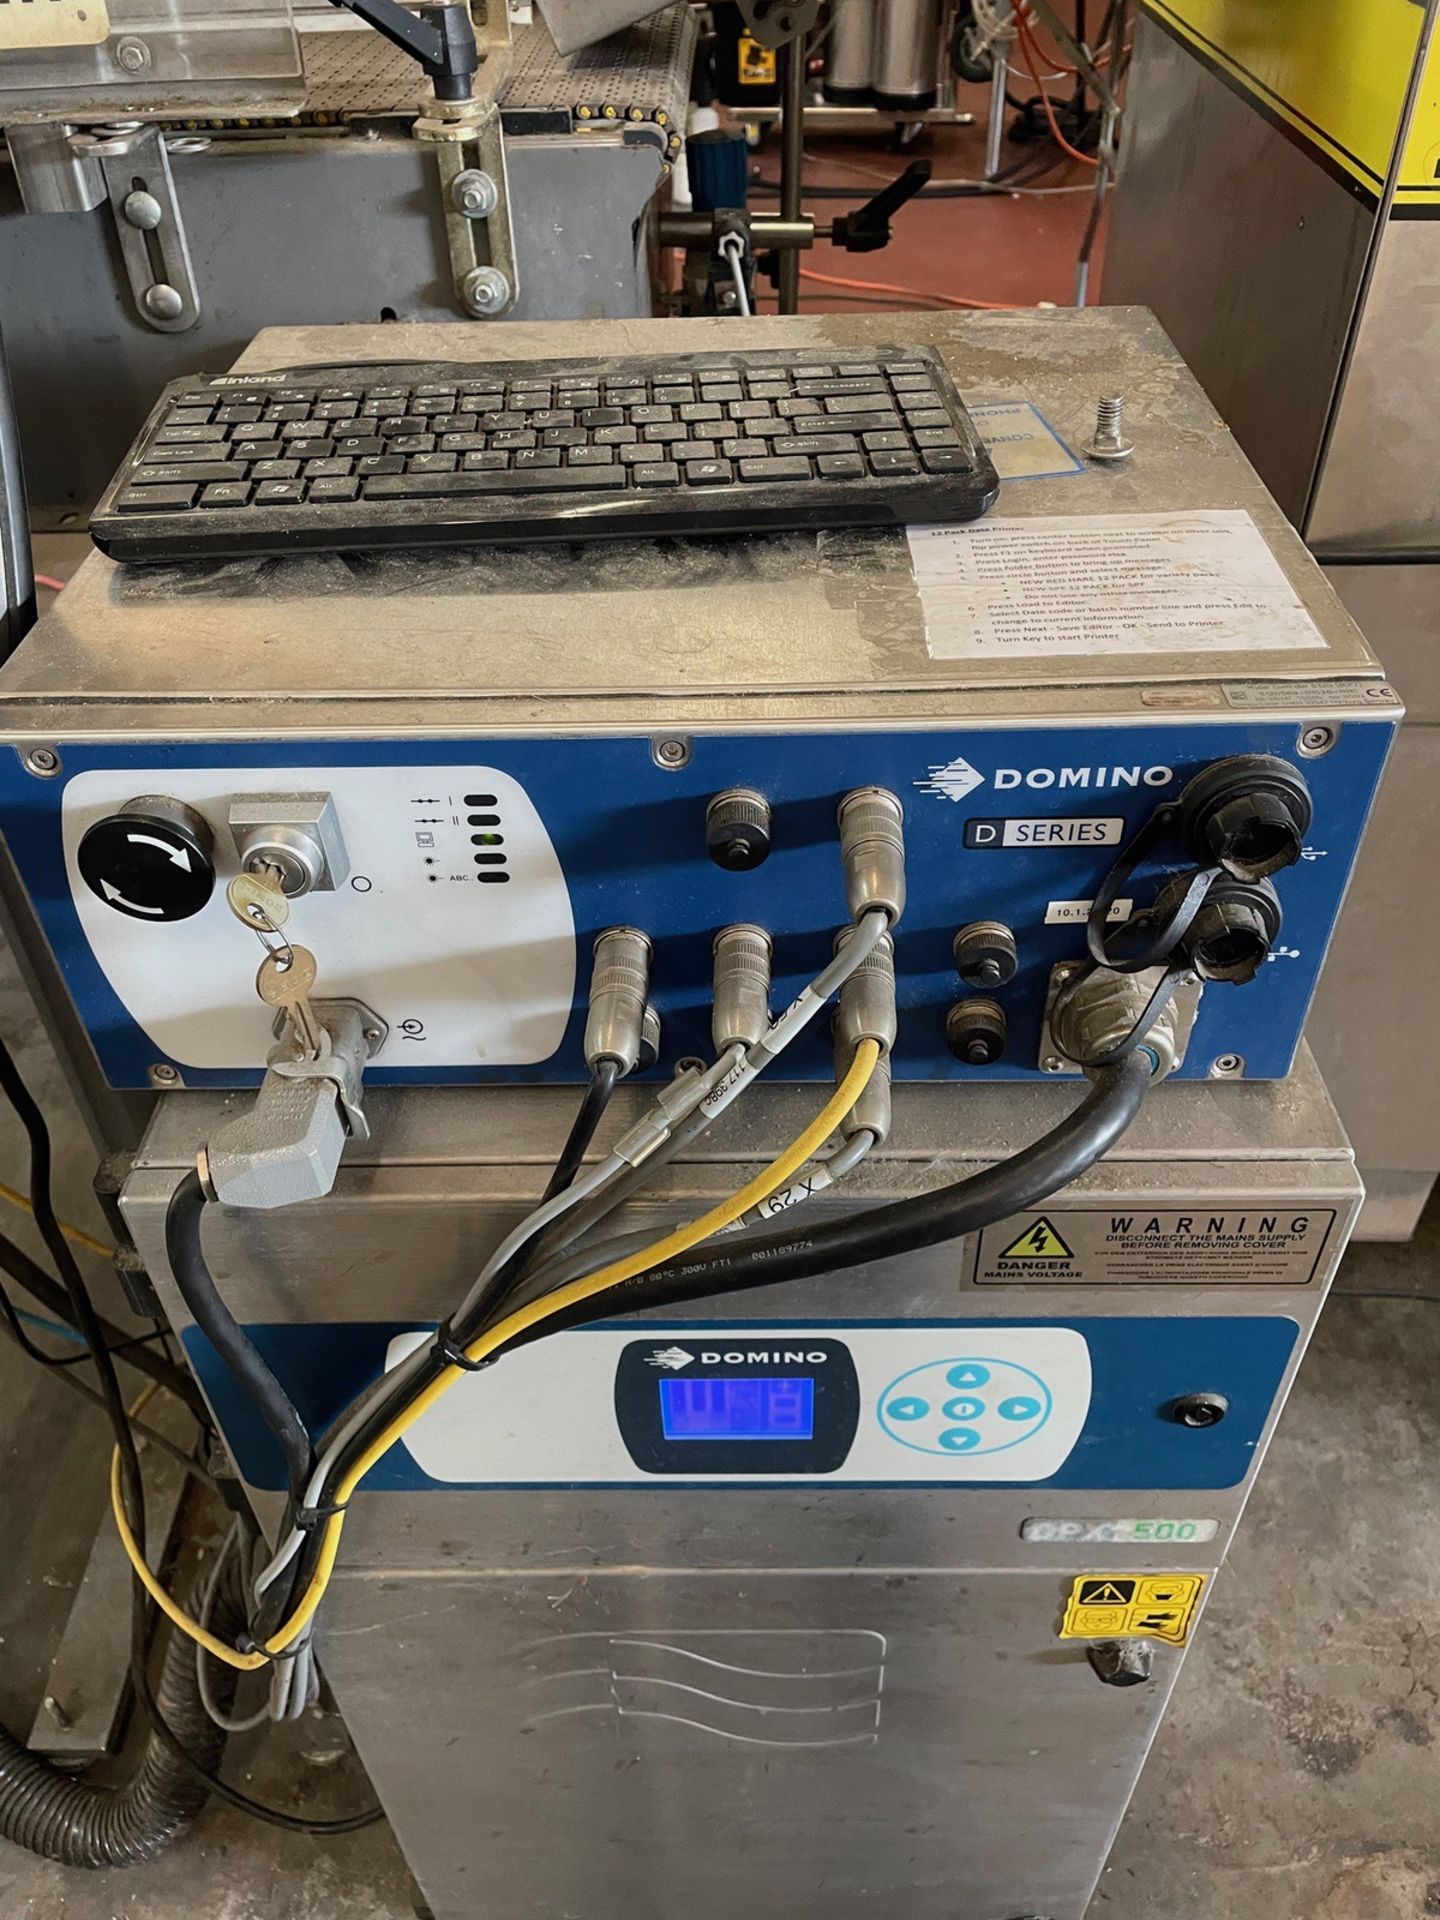 Domino Model D120i, Serial No. S160551MG1111L Laser Coder With Fume Extractor and 4 | Rig Fee $350 - Image 3 of 5